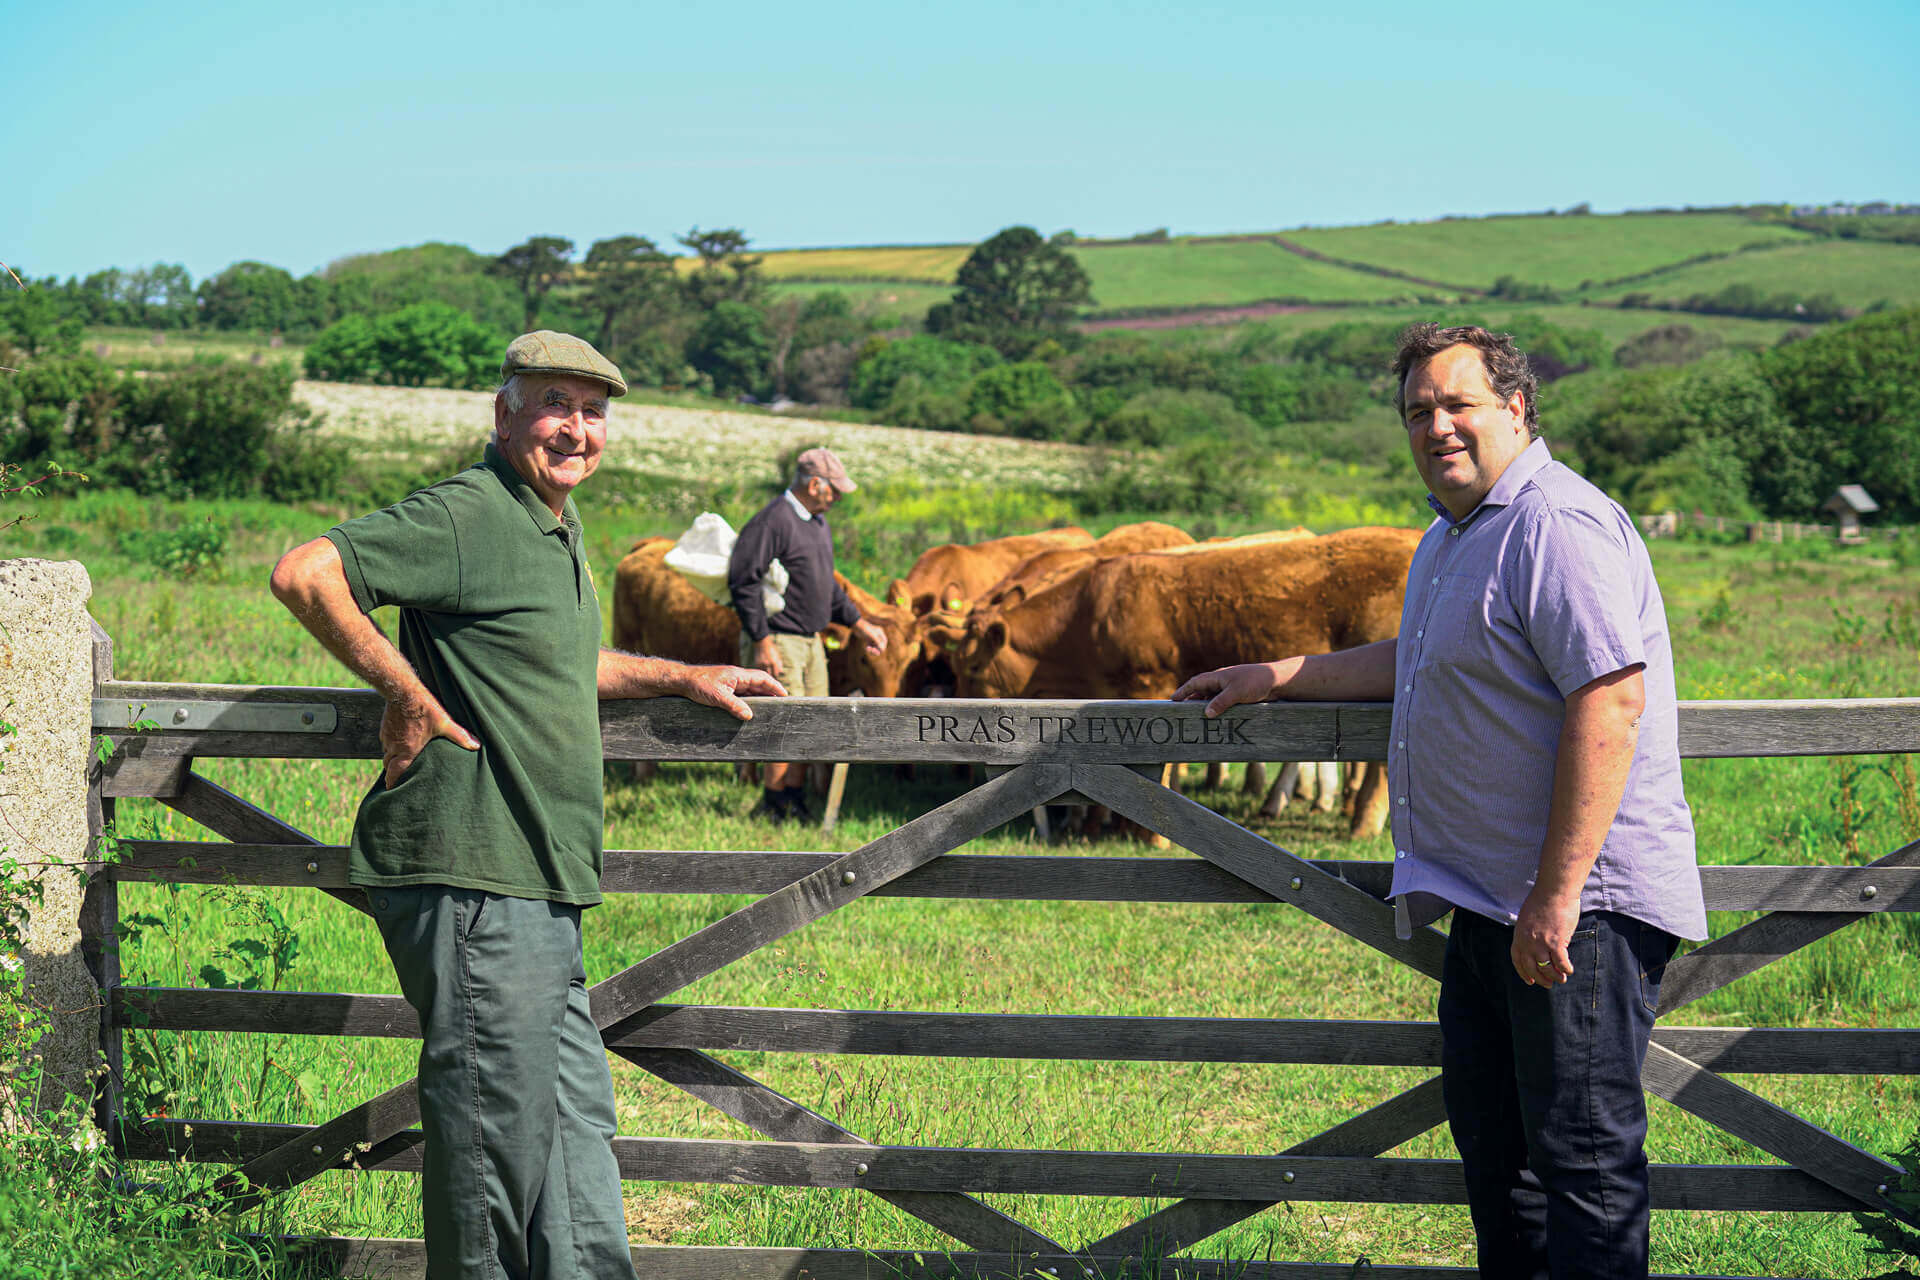 Roger Rundle and Adrian Rundle, father and son farmers from Newquay, observing their herd of South Devon’s introduced to manage Trewollack wildflower meadows (Pras Trewolek), Nansledan